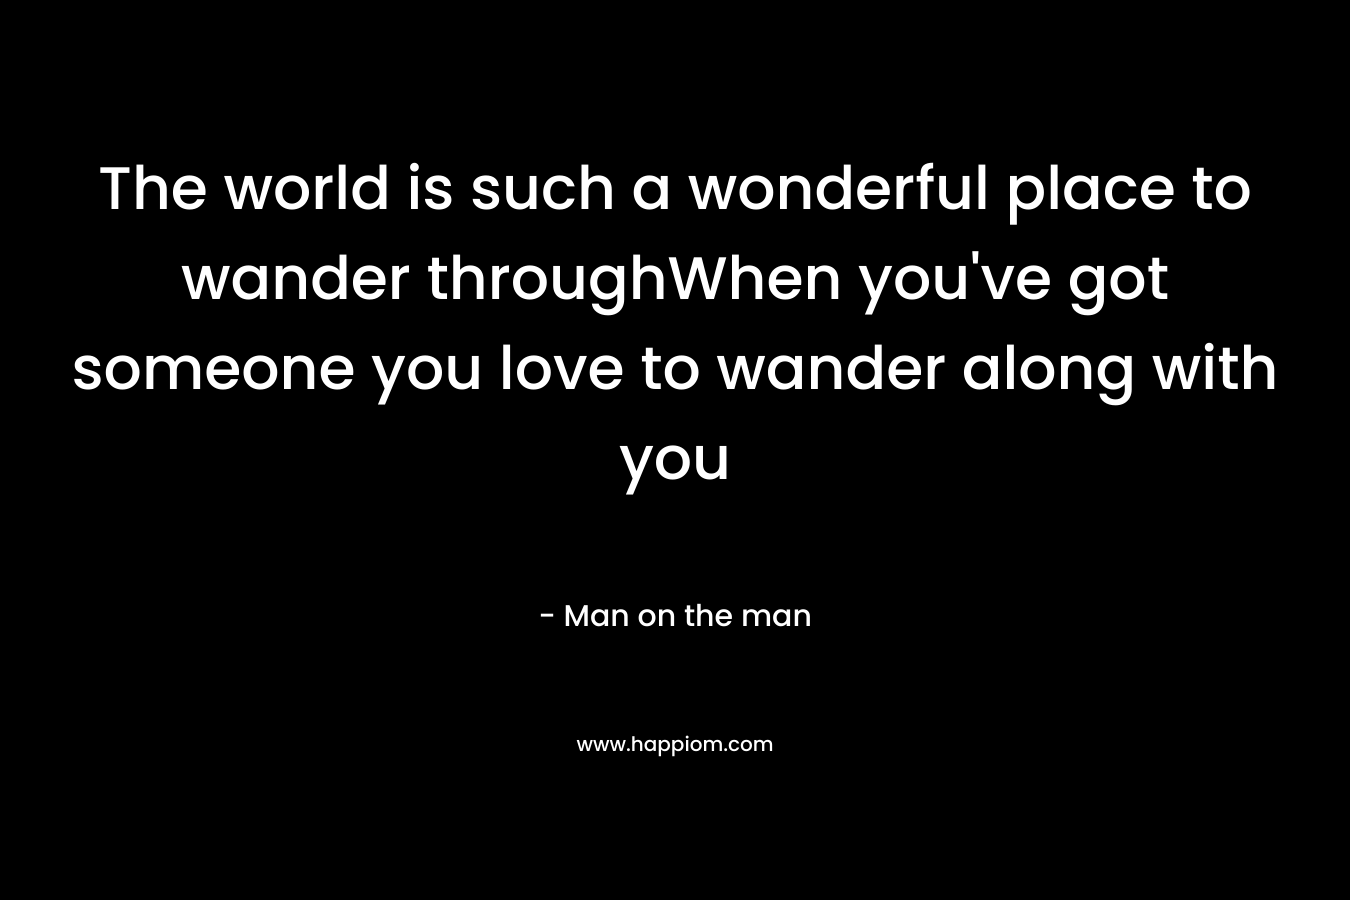 The world is such a wonderful place to wander throughWhen you've got someone you love to wander along with you